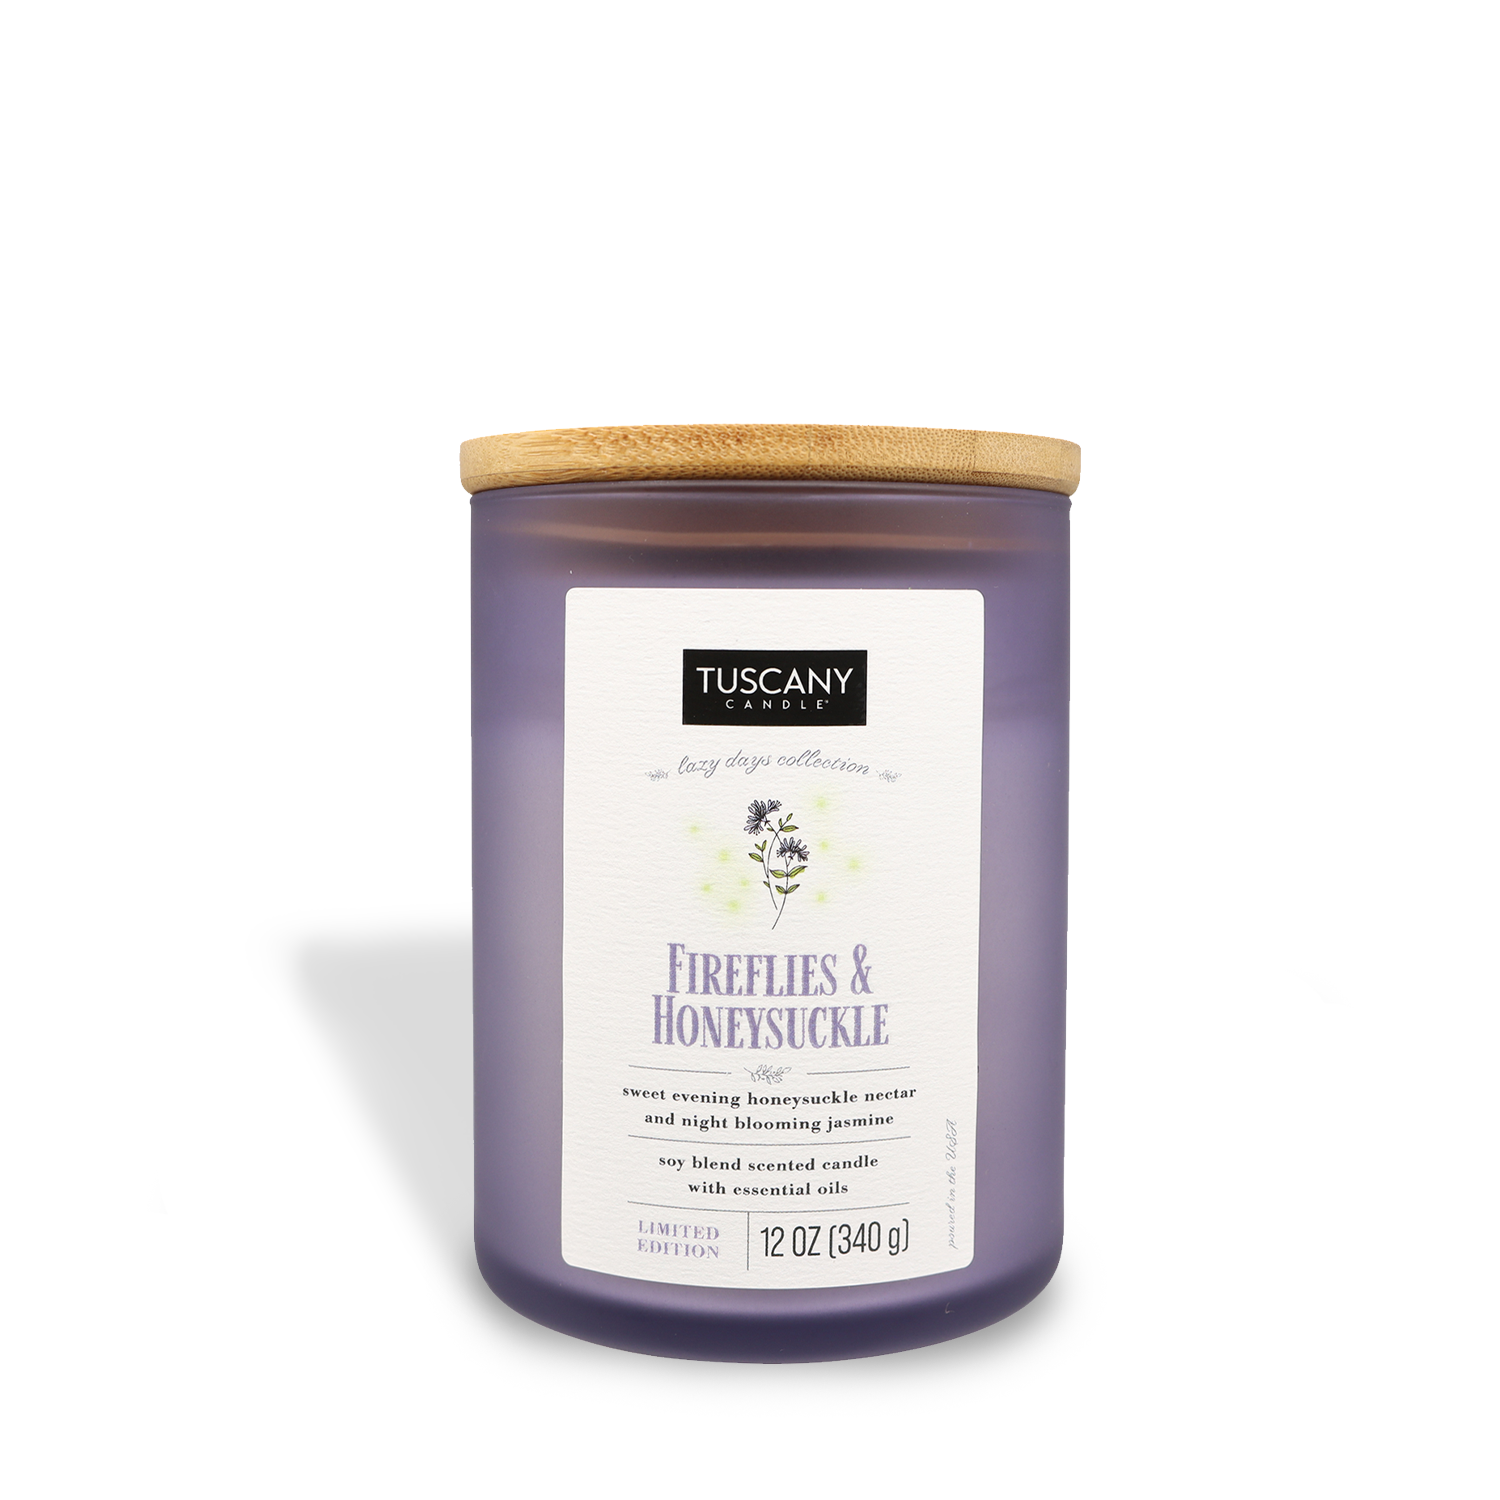 A Tuscany Candle® SEASONAL fireflies & honeysuckle scented candle in a purple jar with a matching lid.